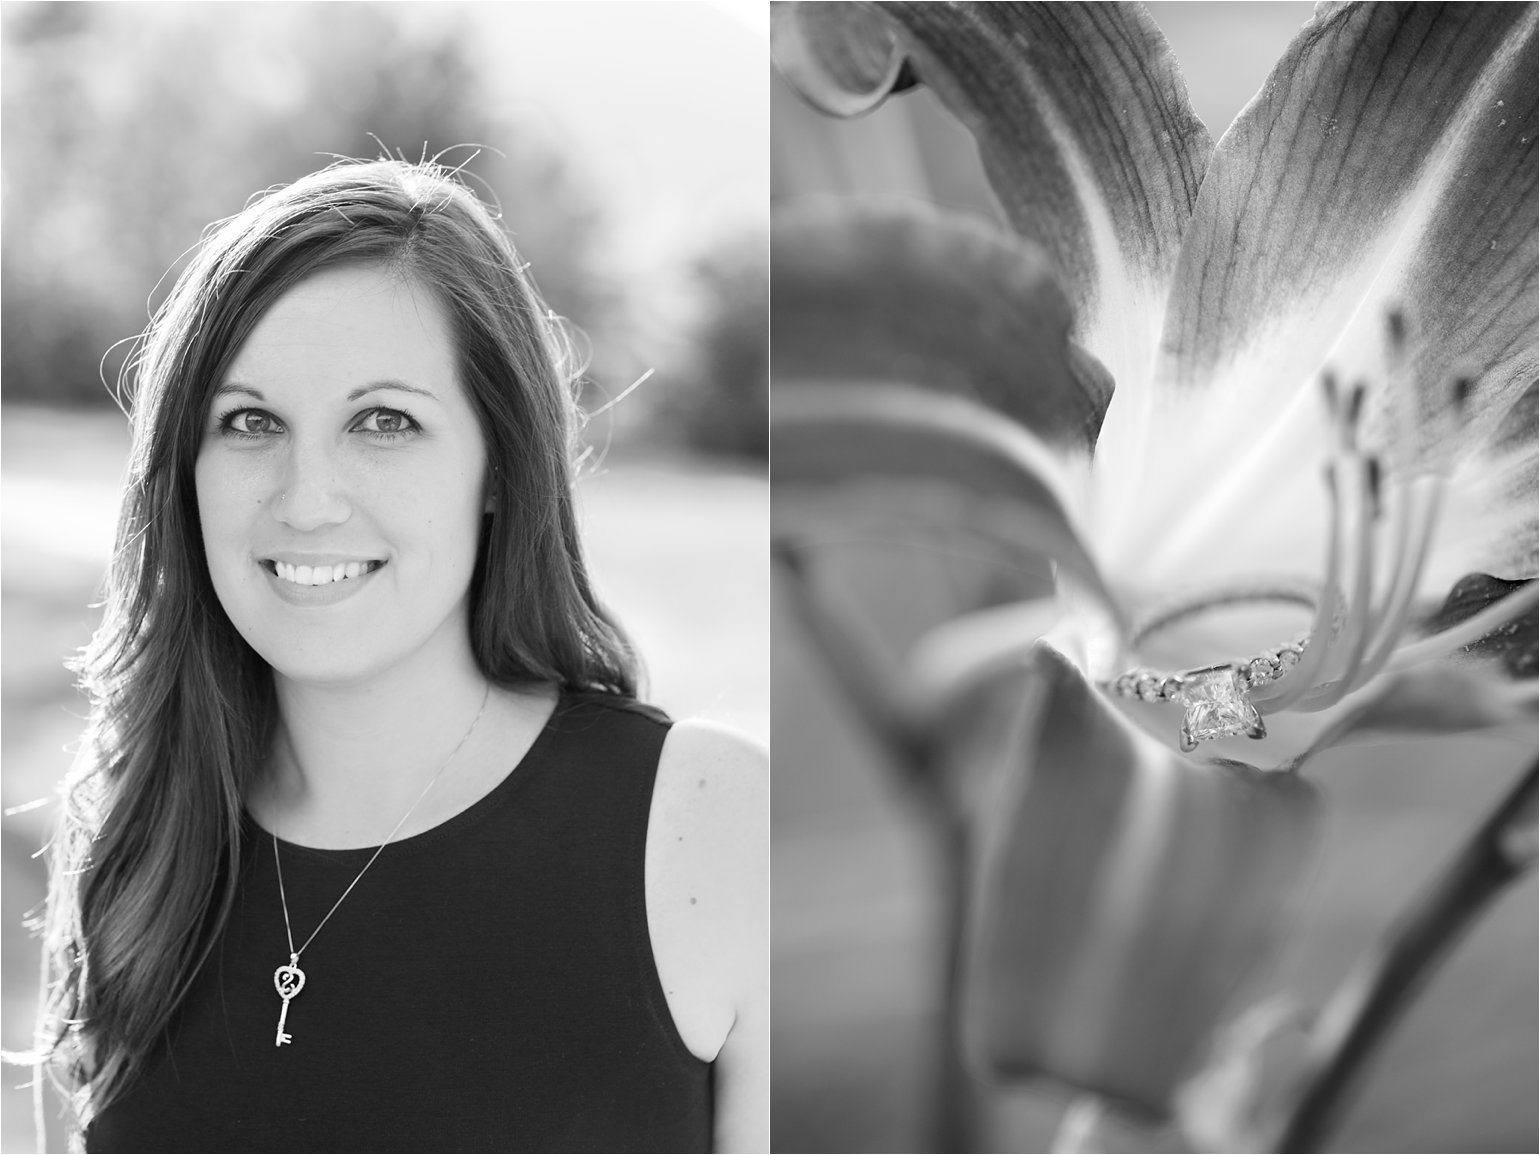 Black & White Bride-to-Be & Ring in Daylily © 2015 Maundy Mitchell